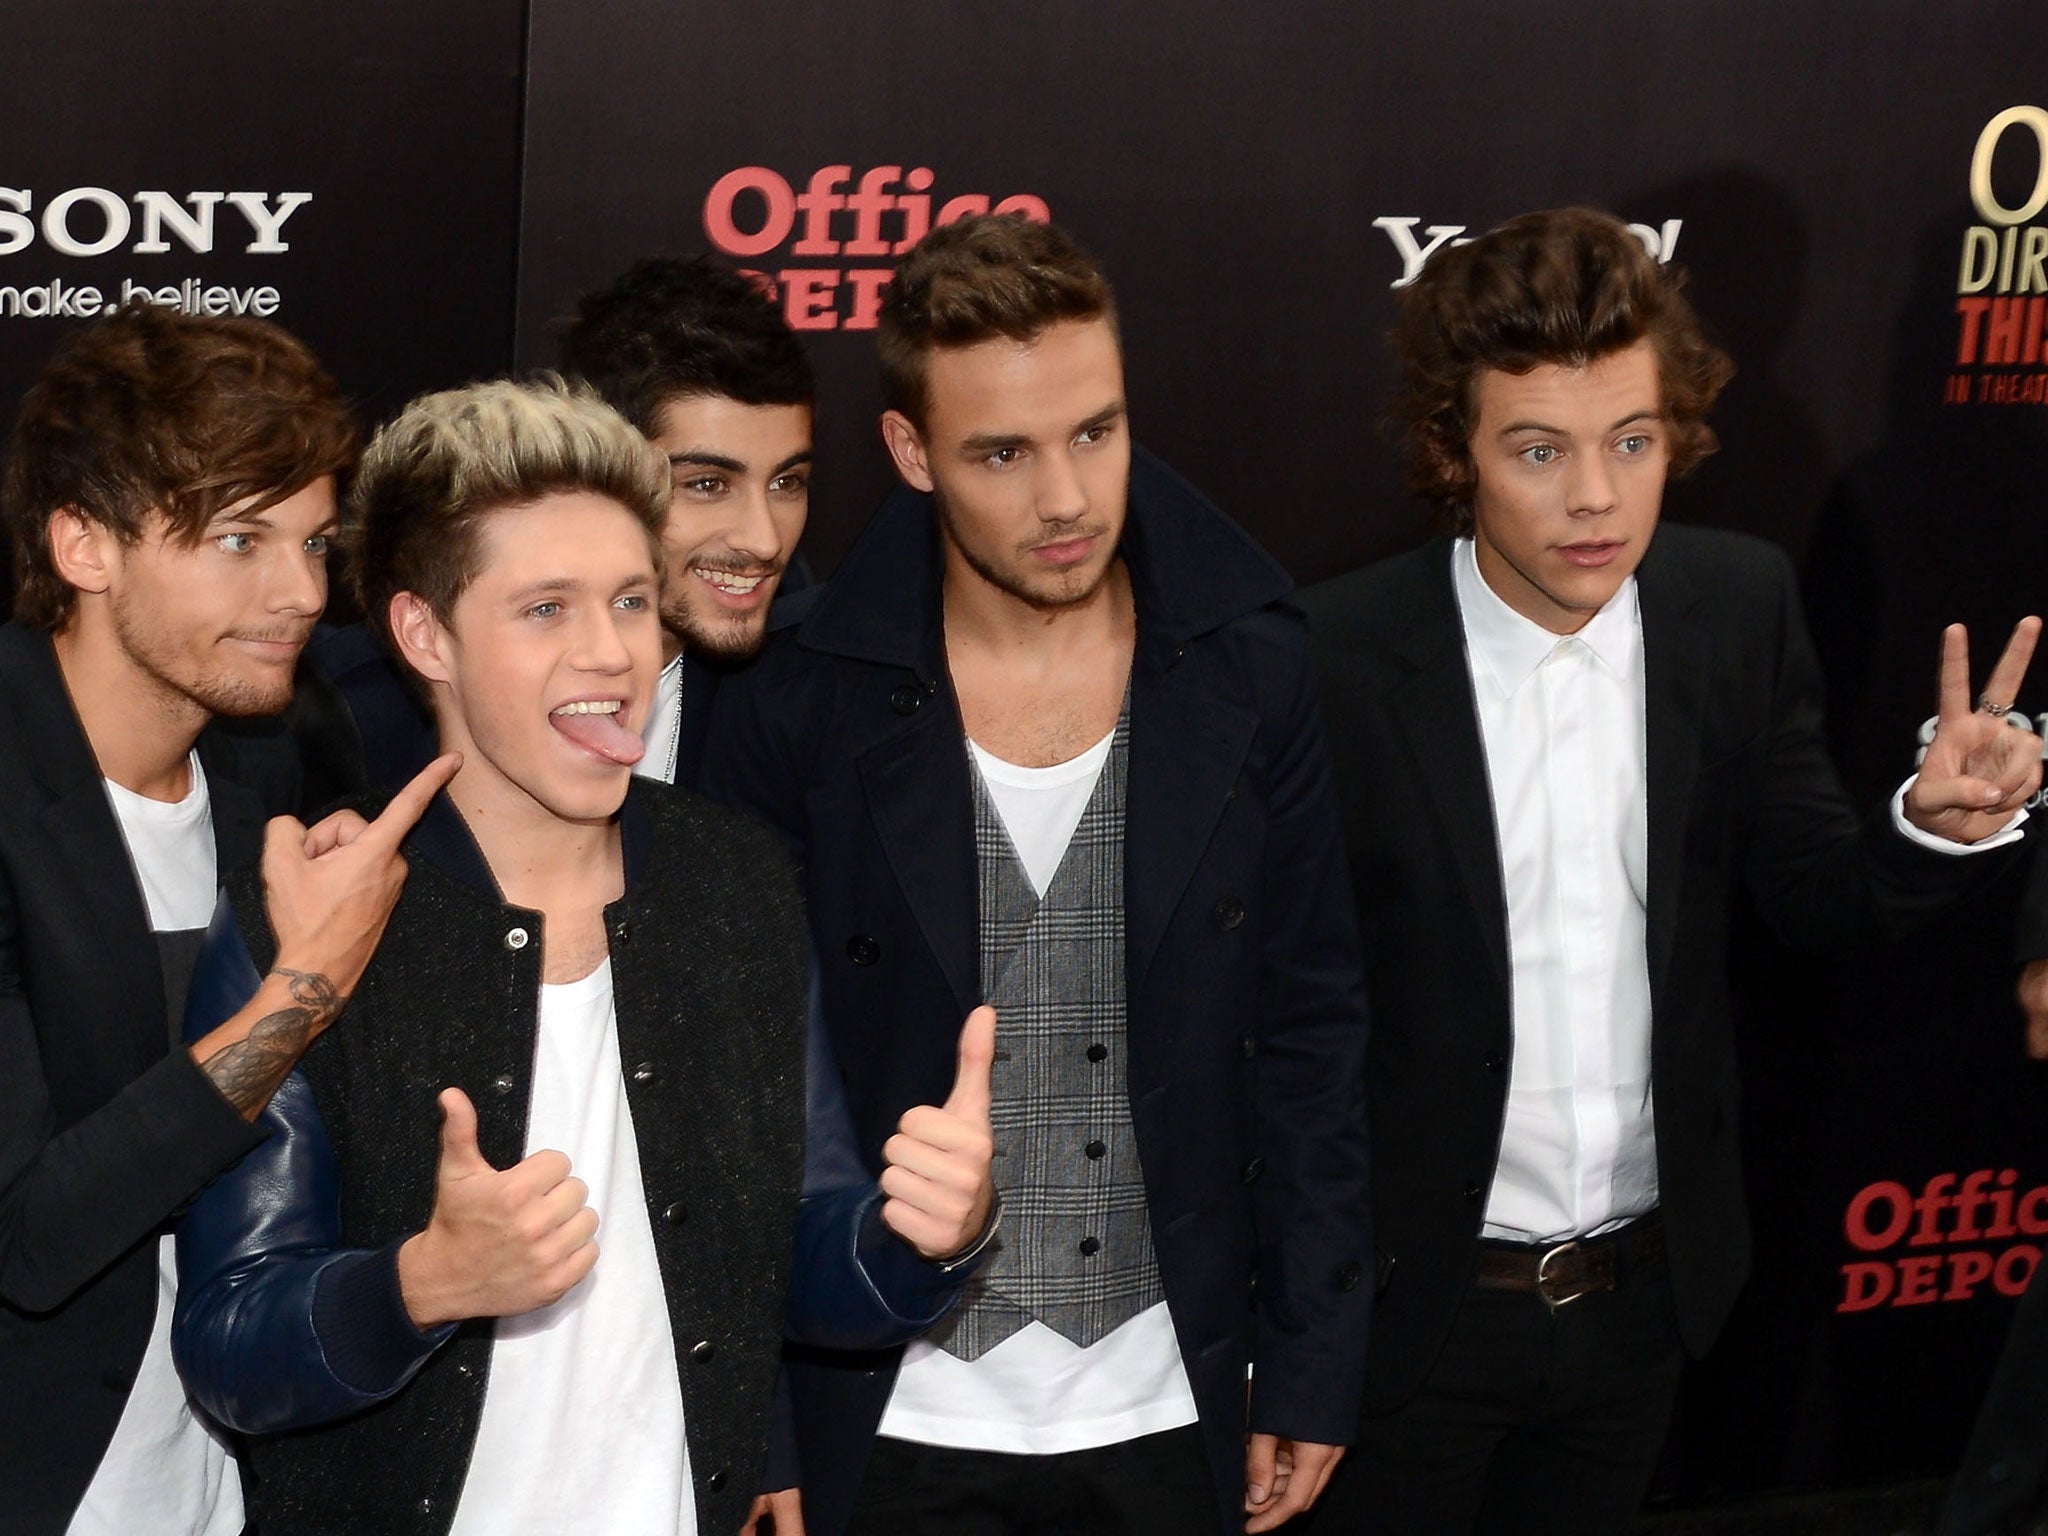 One Direction have soared to number one on the iTunes chart